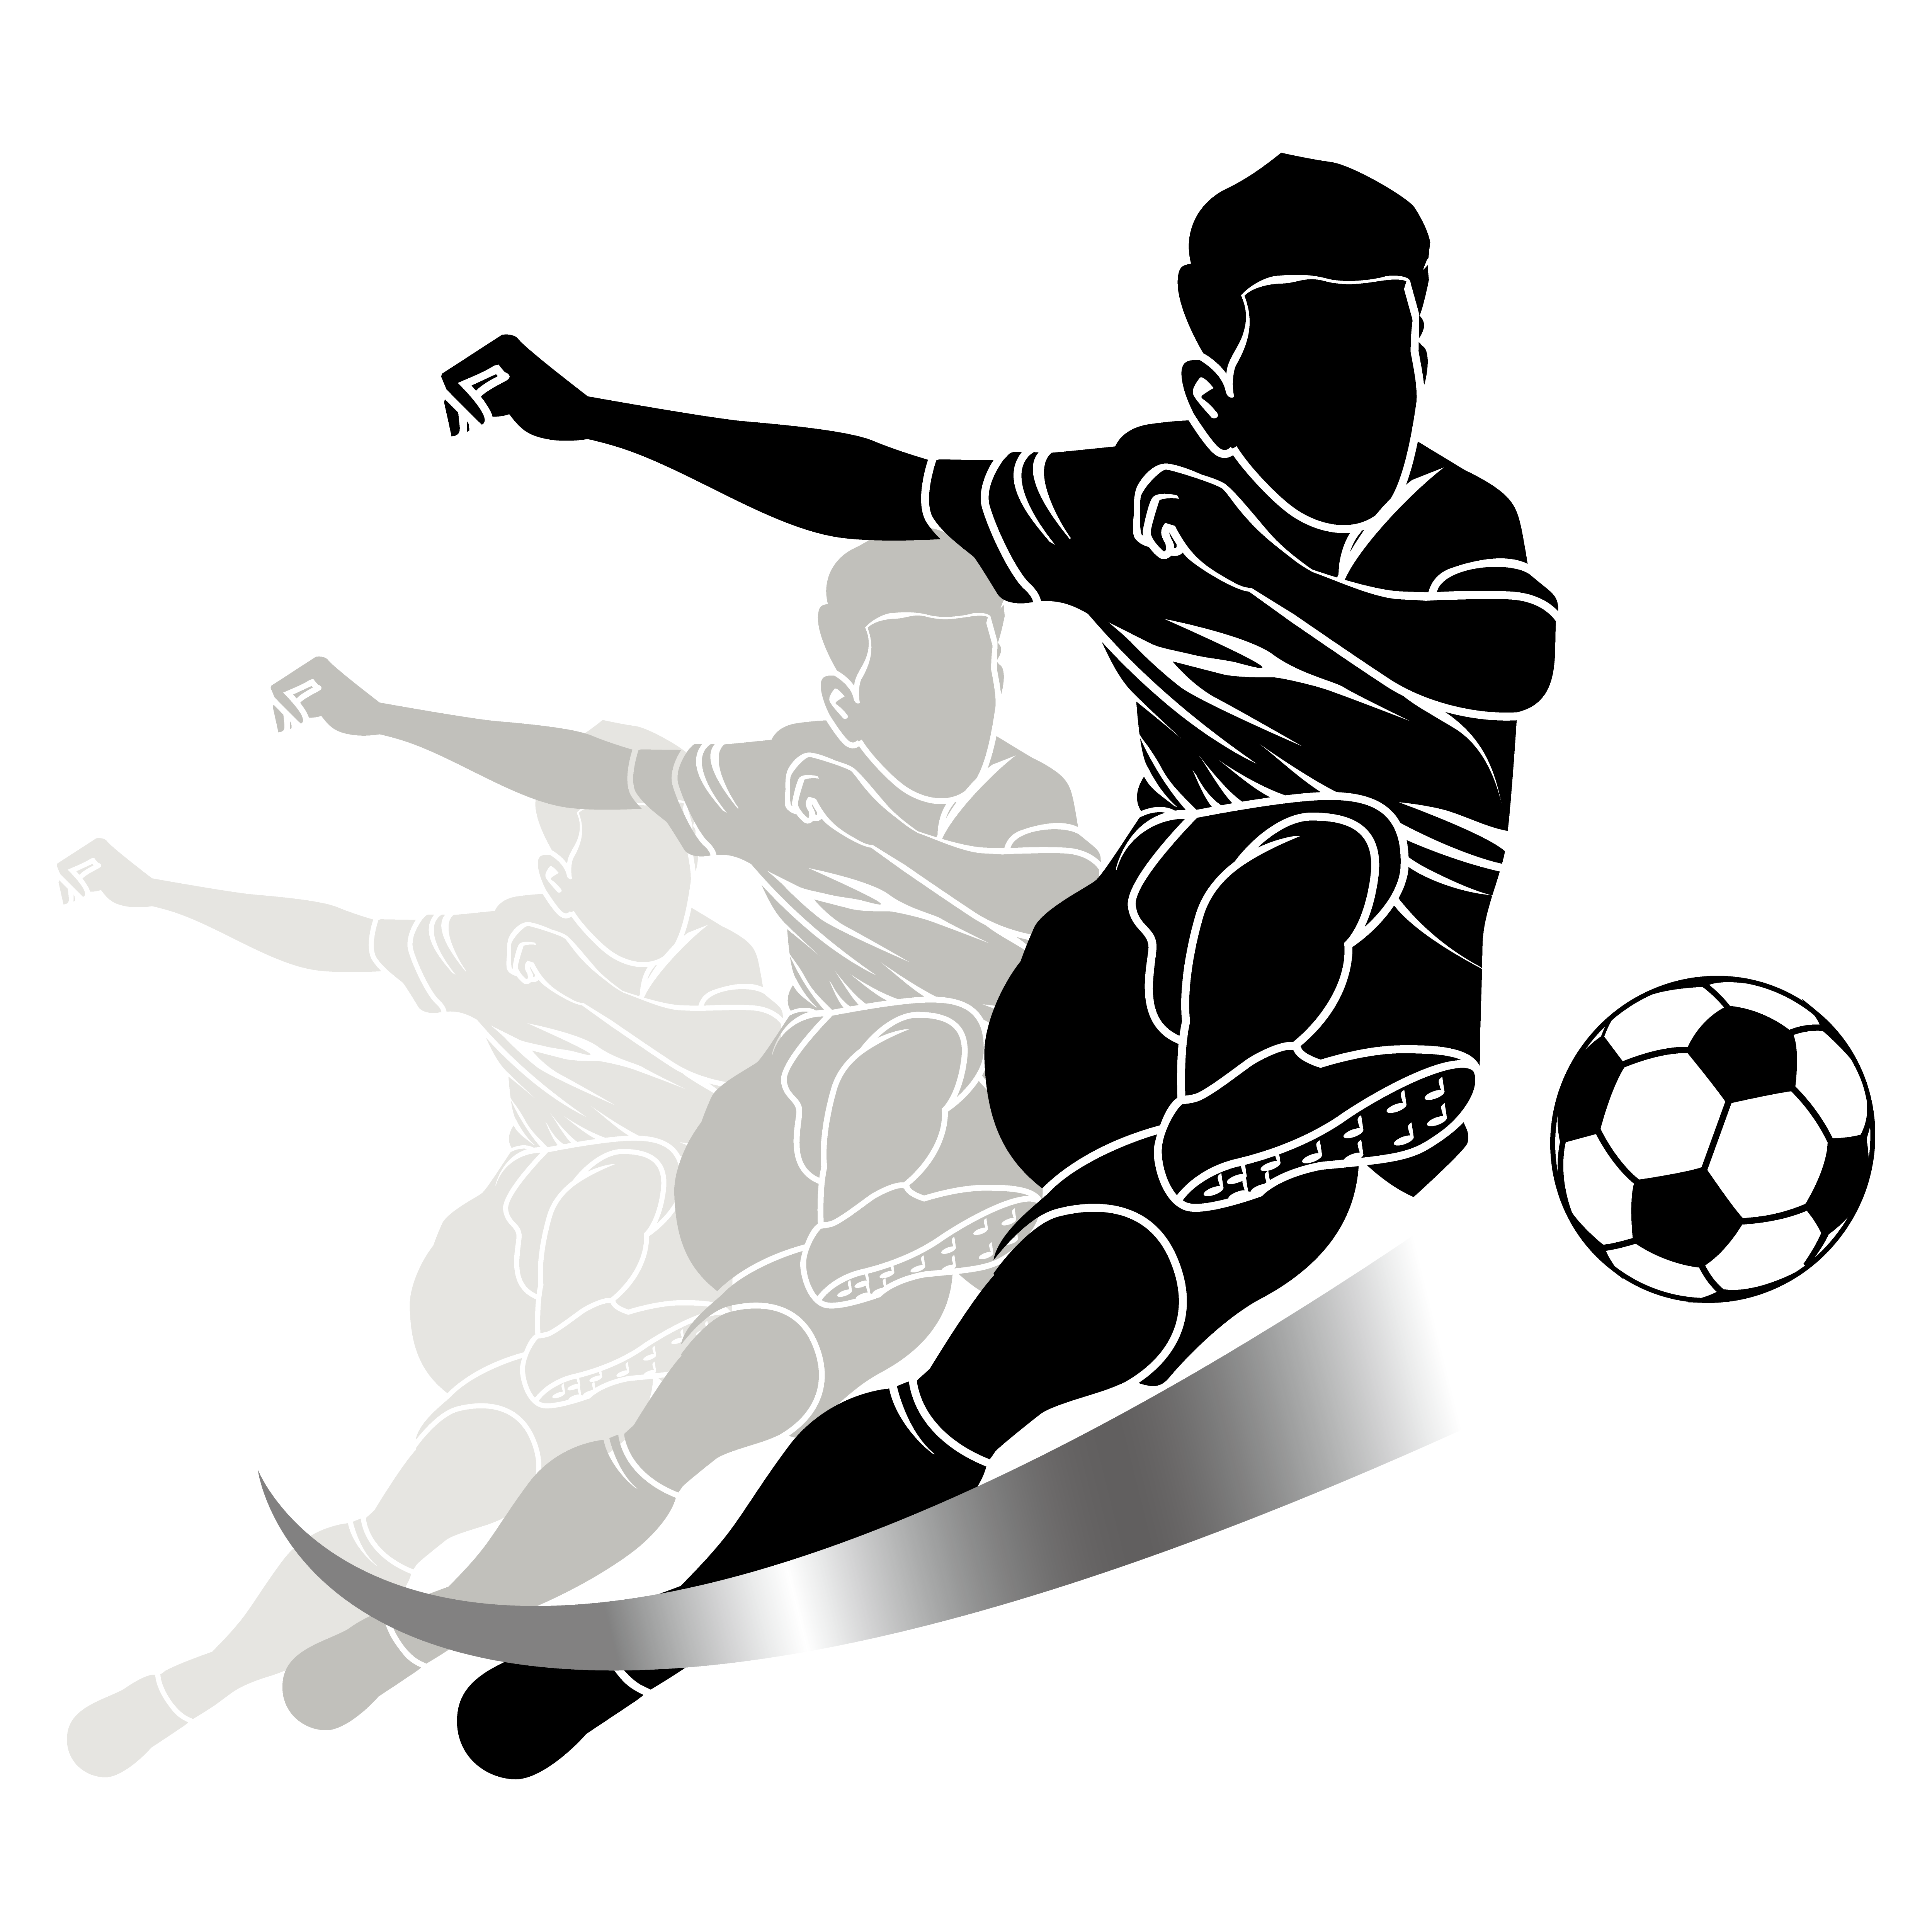 Download Player Football Sport Kick Free Transparent Image HD Clipart